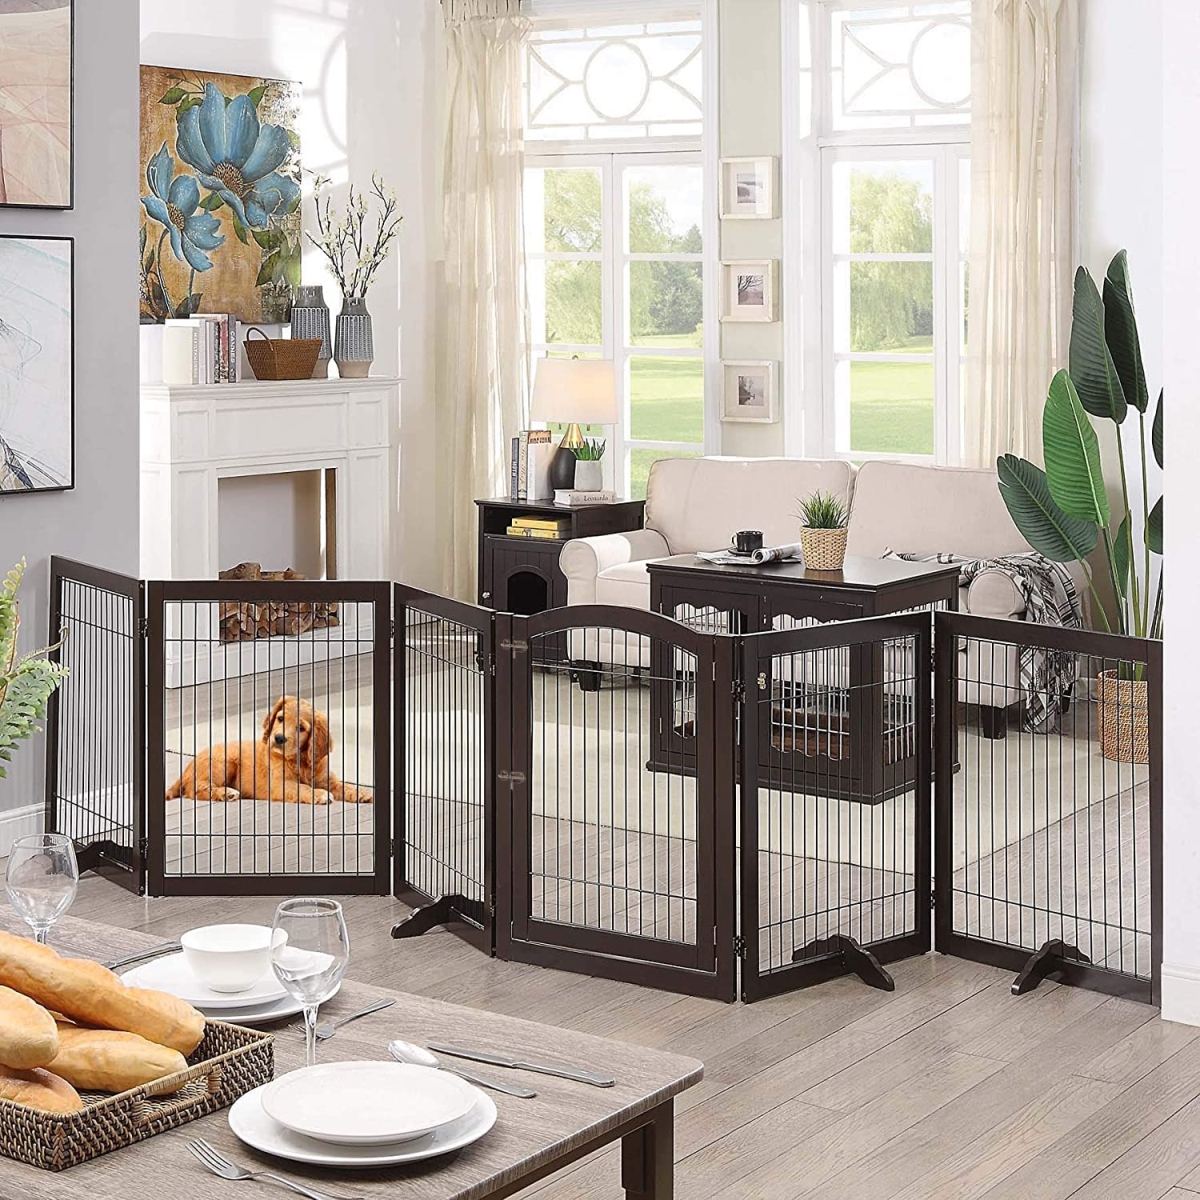 Picture of UniPaws UH5053 6 Panels Pet Gate with Play Pen -  Espresso